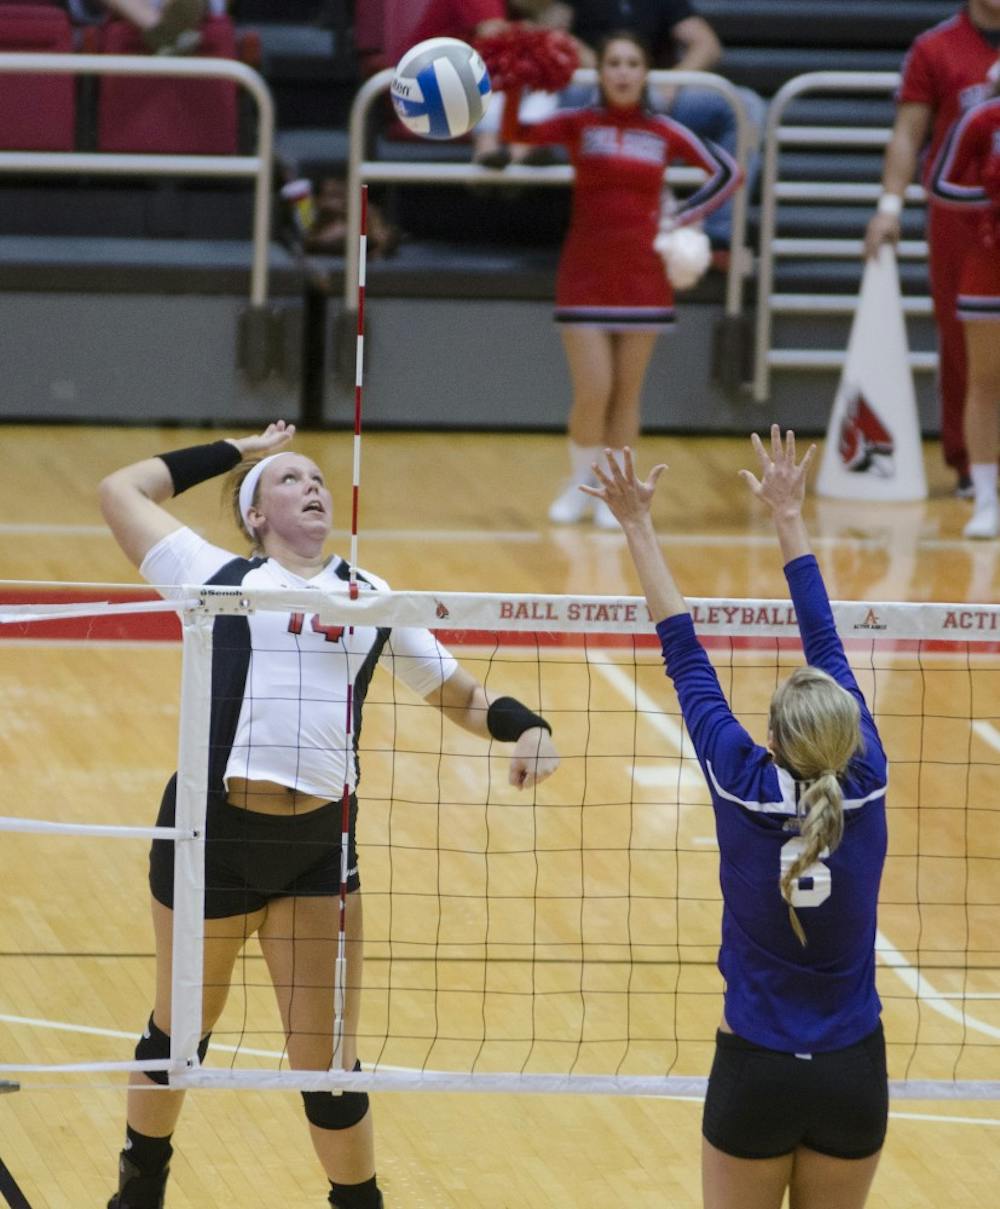 Redshirt middle blocker junior Kelly Hopkins attempts to hit the ball over the net during the match against Western Illinois on Aug. 29 at Worthen Arena. DN PHOTO BREANNA DAUGHERTY